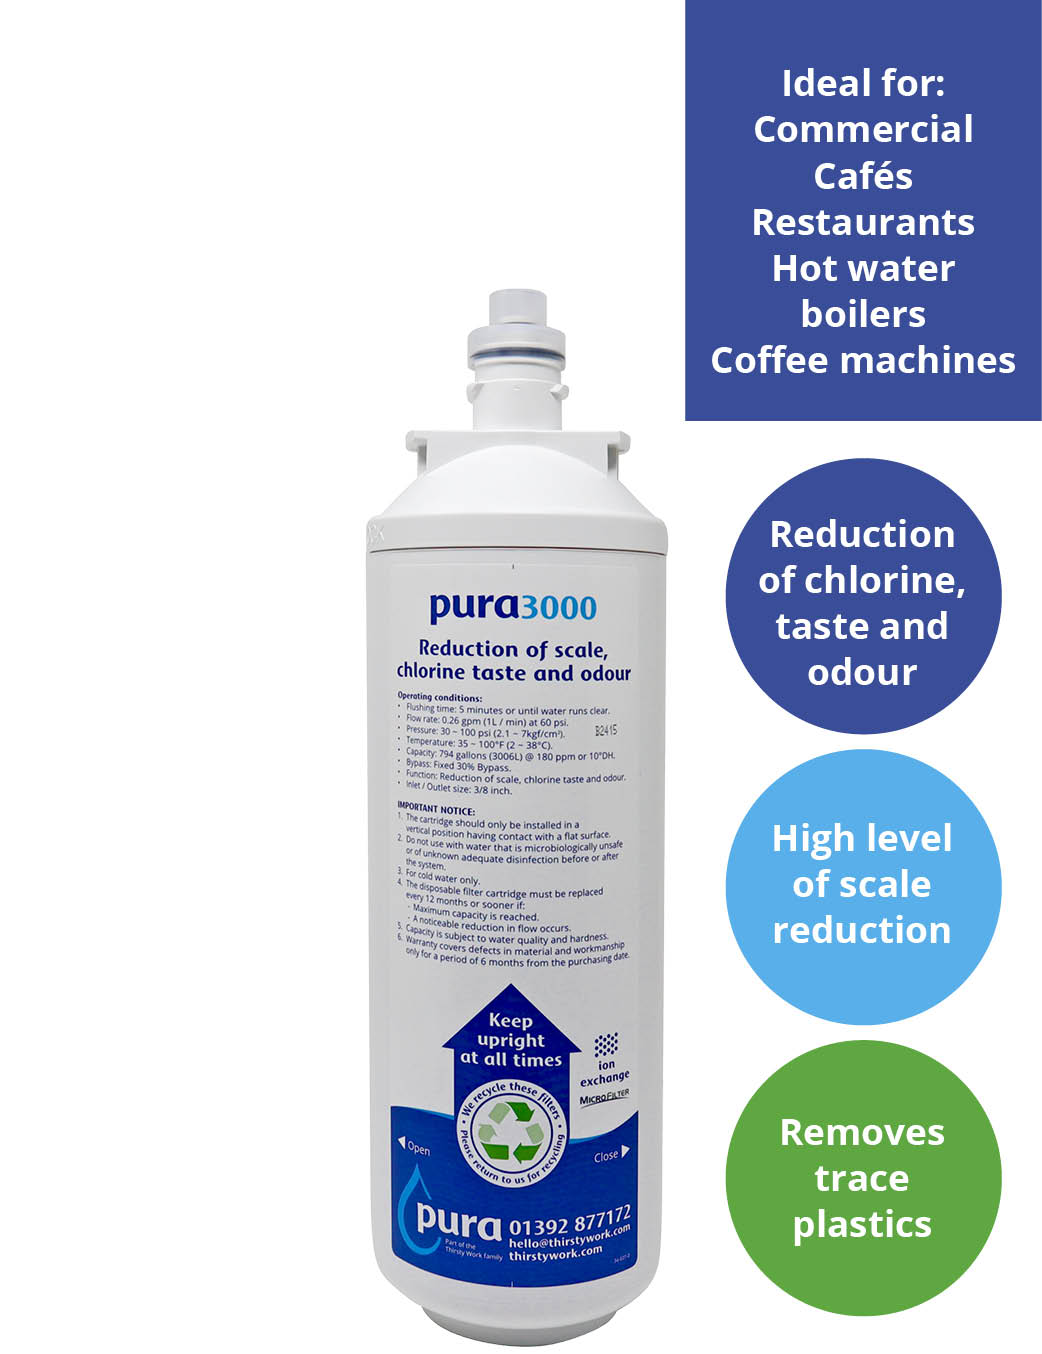 pura 3000 commercial water filter for use in coffee machines and hot water boilers